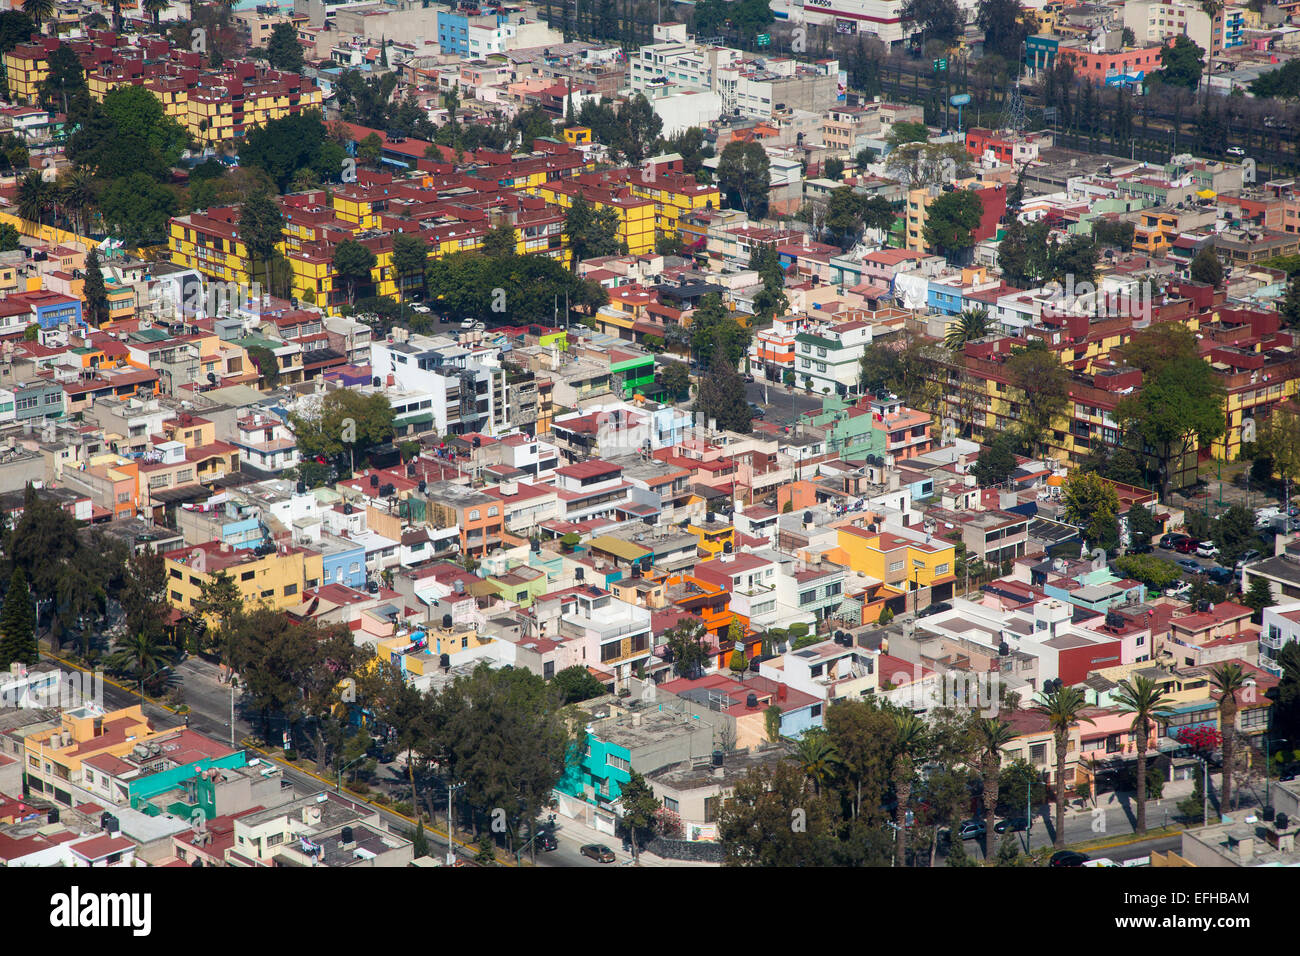 Mexico City, Mexico - Colorful housing in Mexico City. Stock Photo